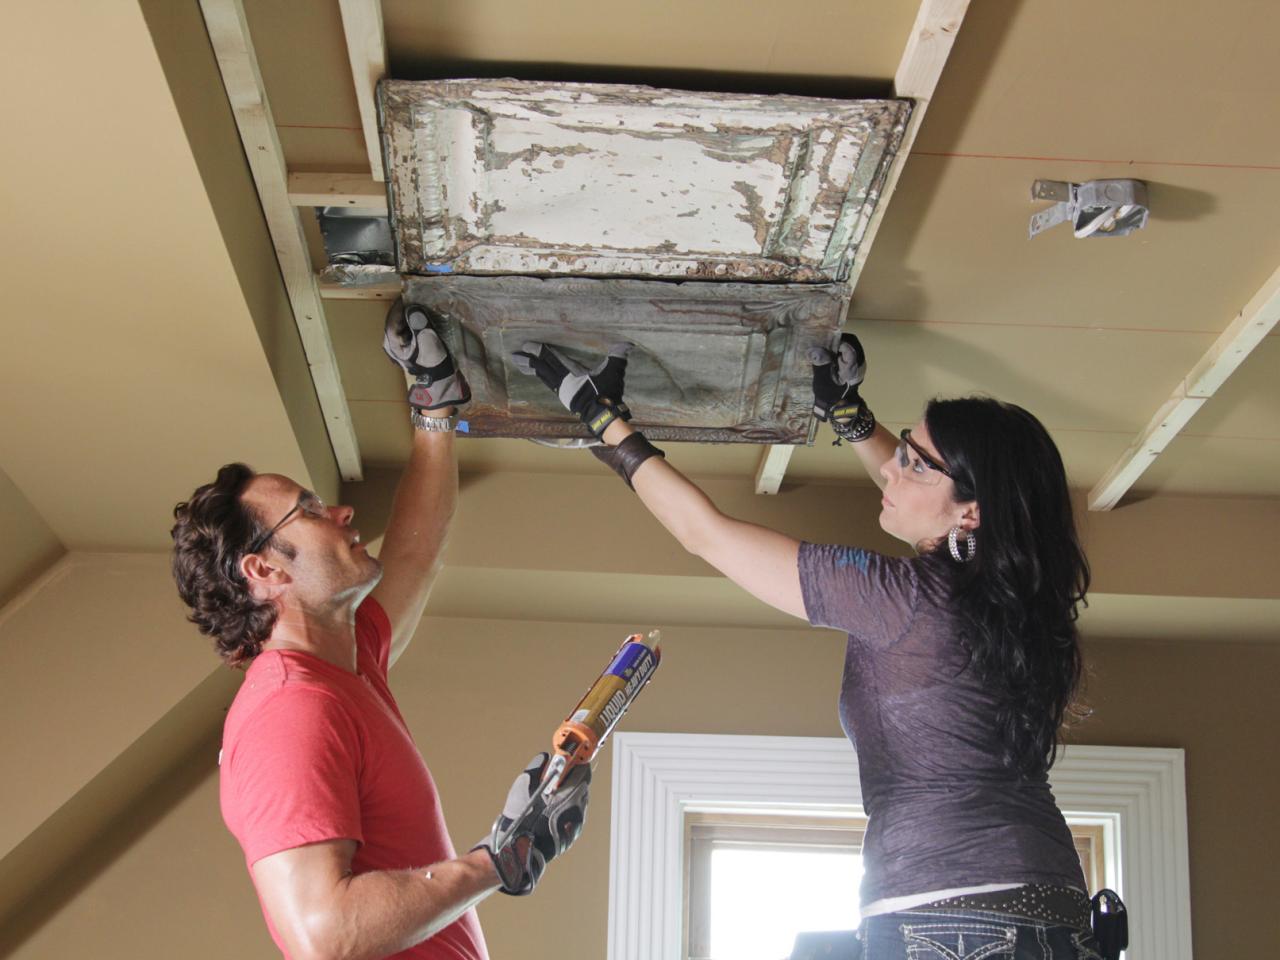 How To Install A Stamped Tin Ceiling, Tin Tile Ceiling Ideas